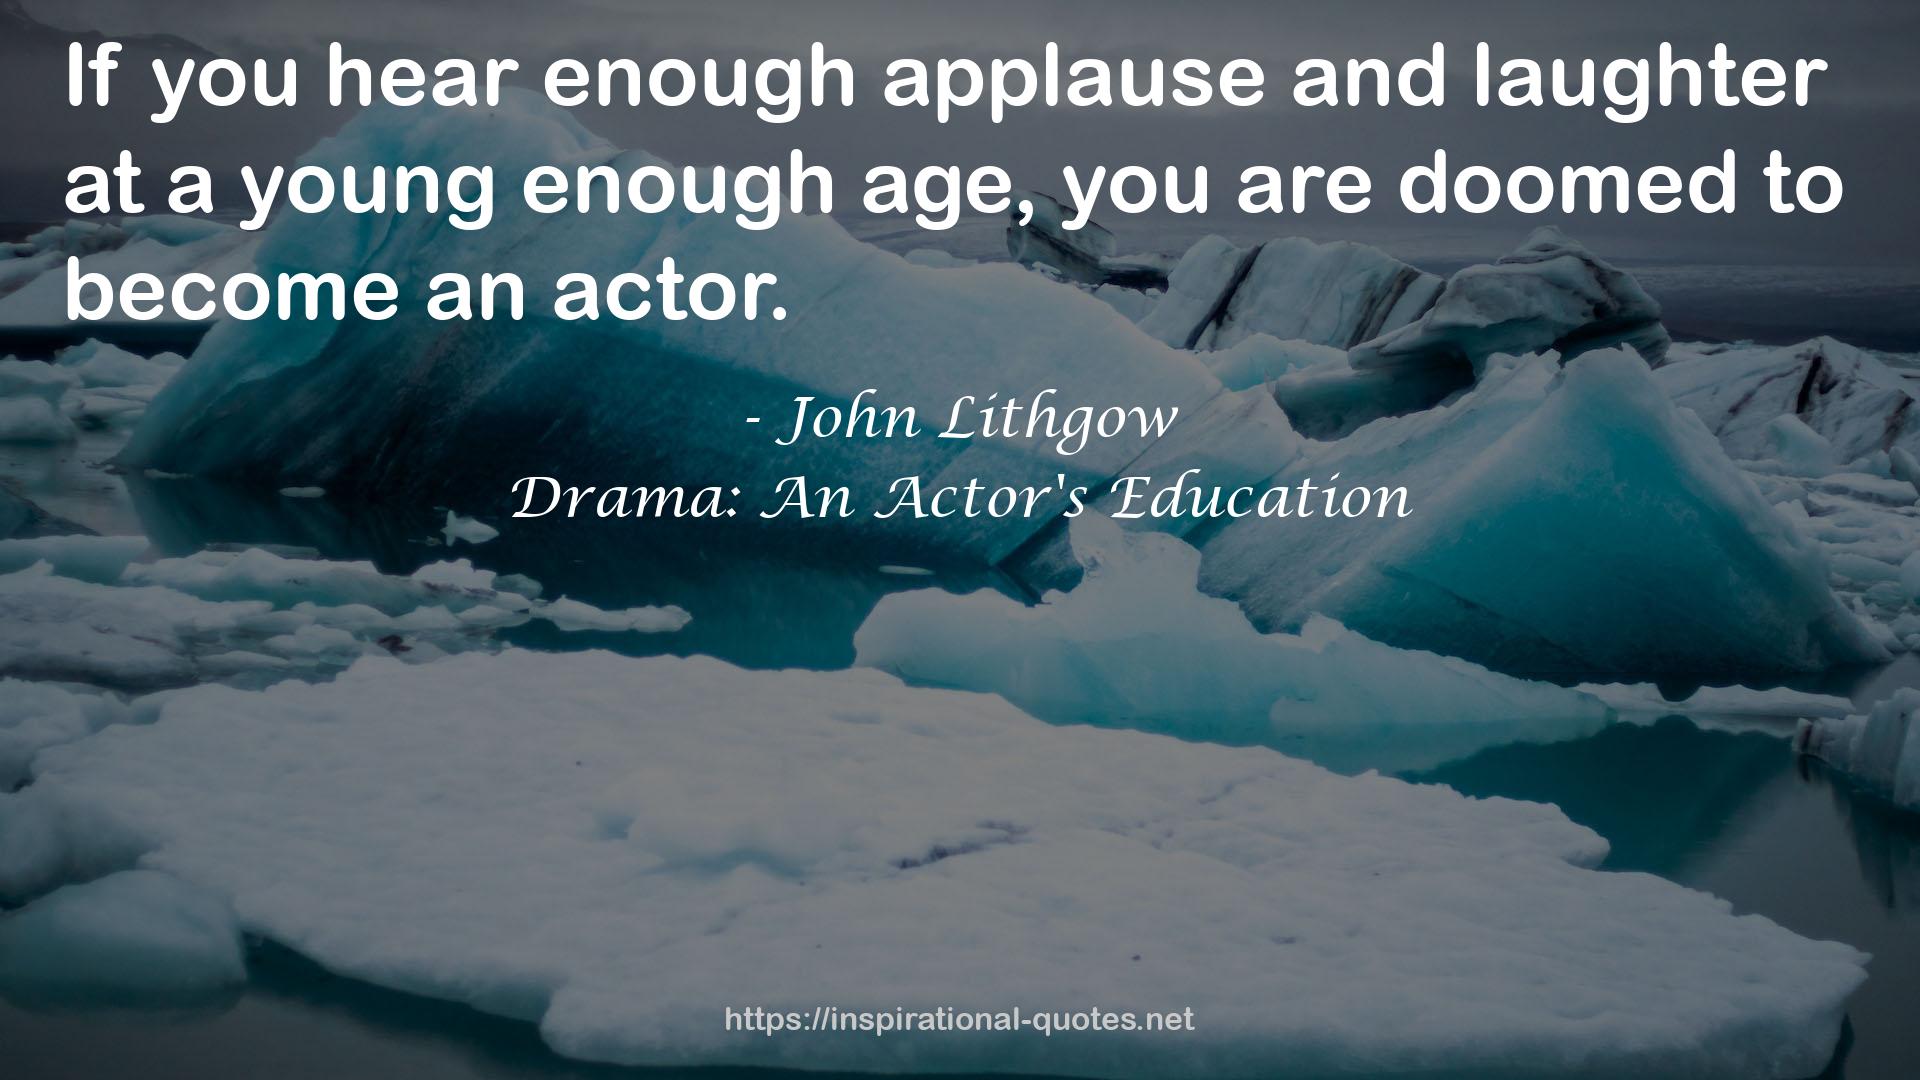 Drama: An Actor's Education QUOTES